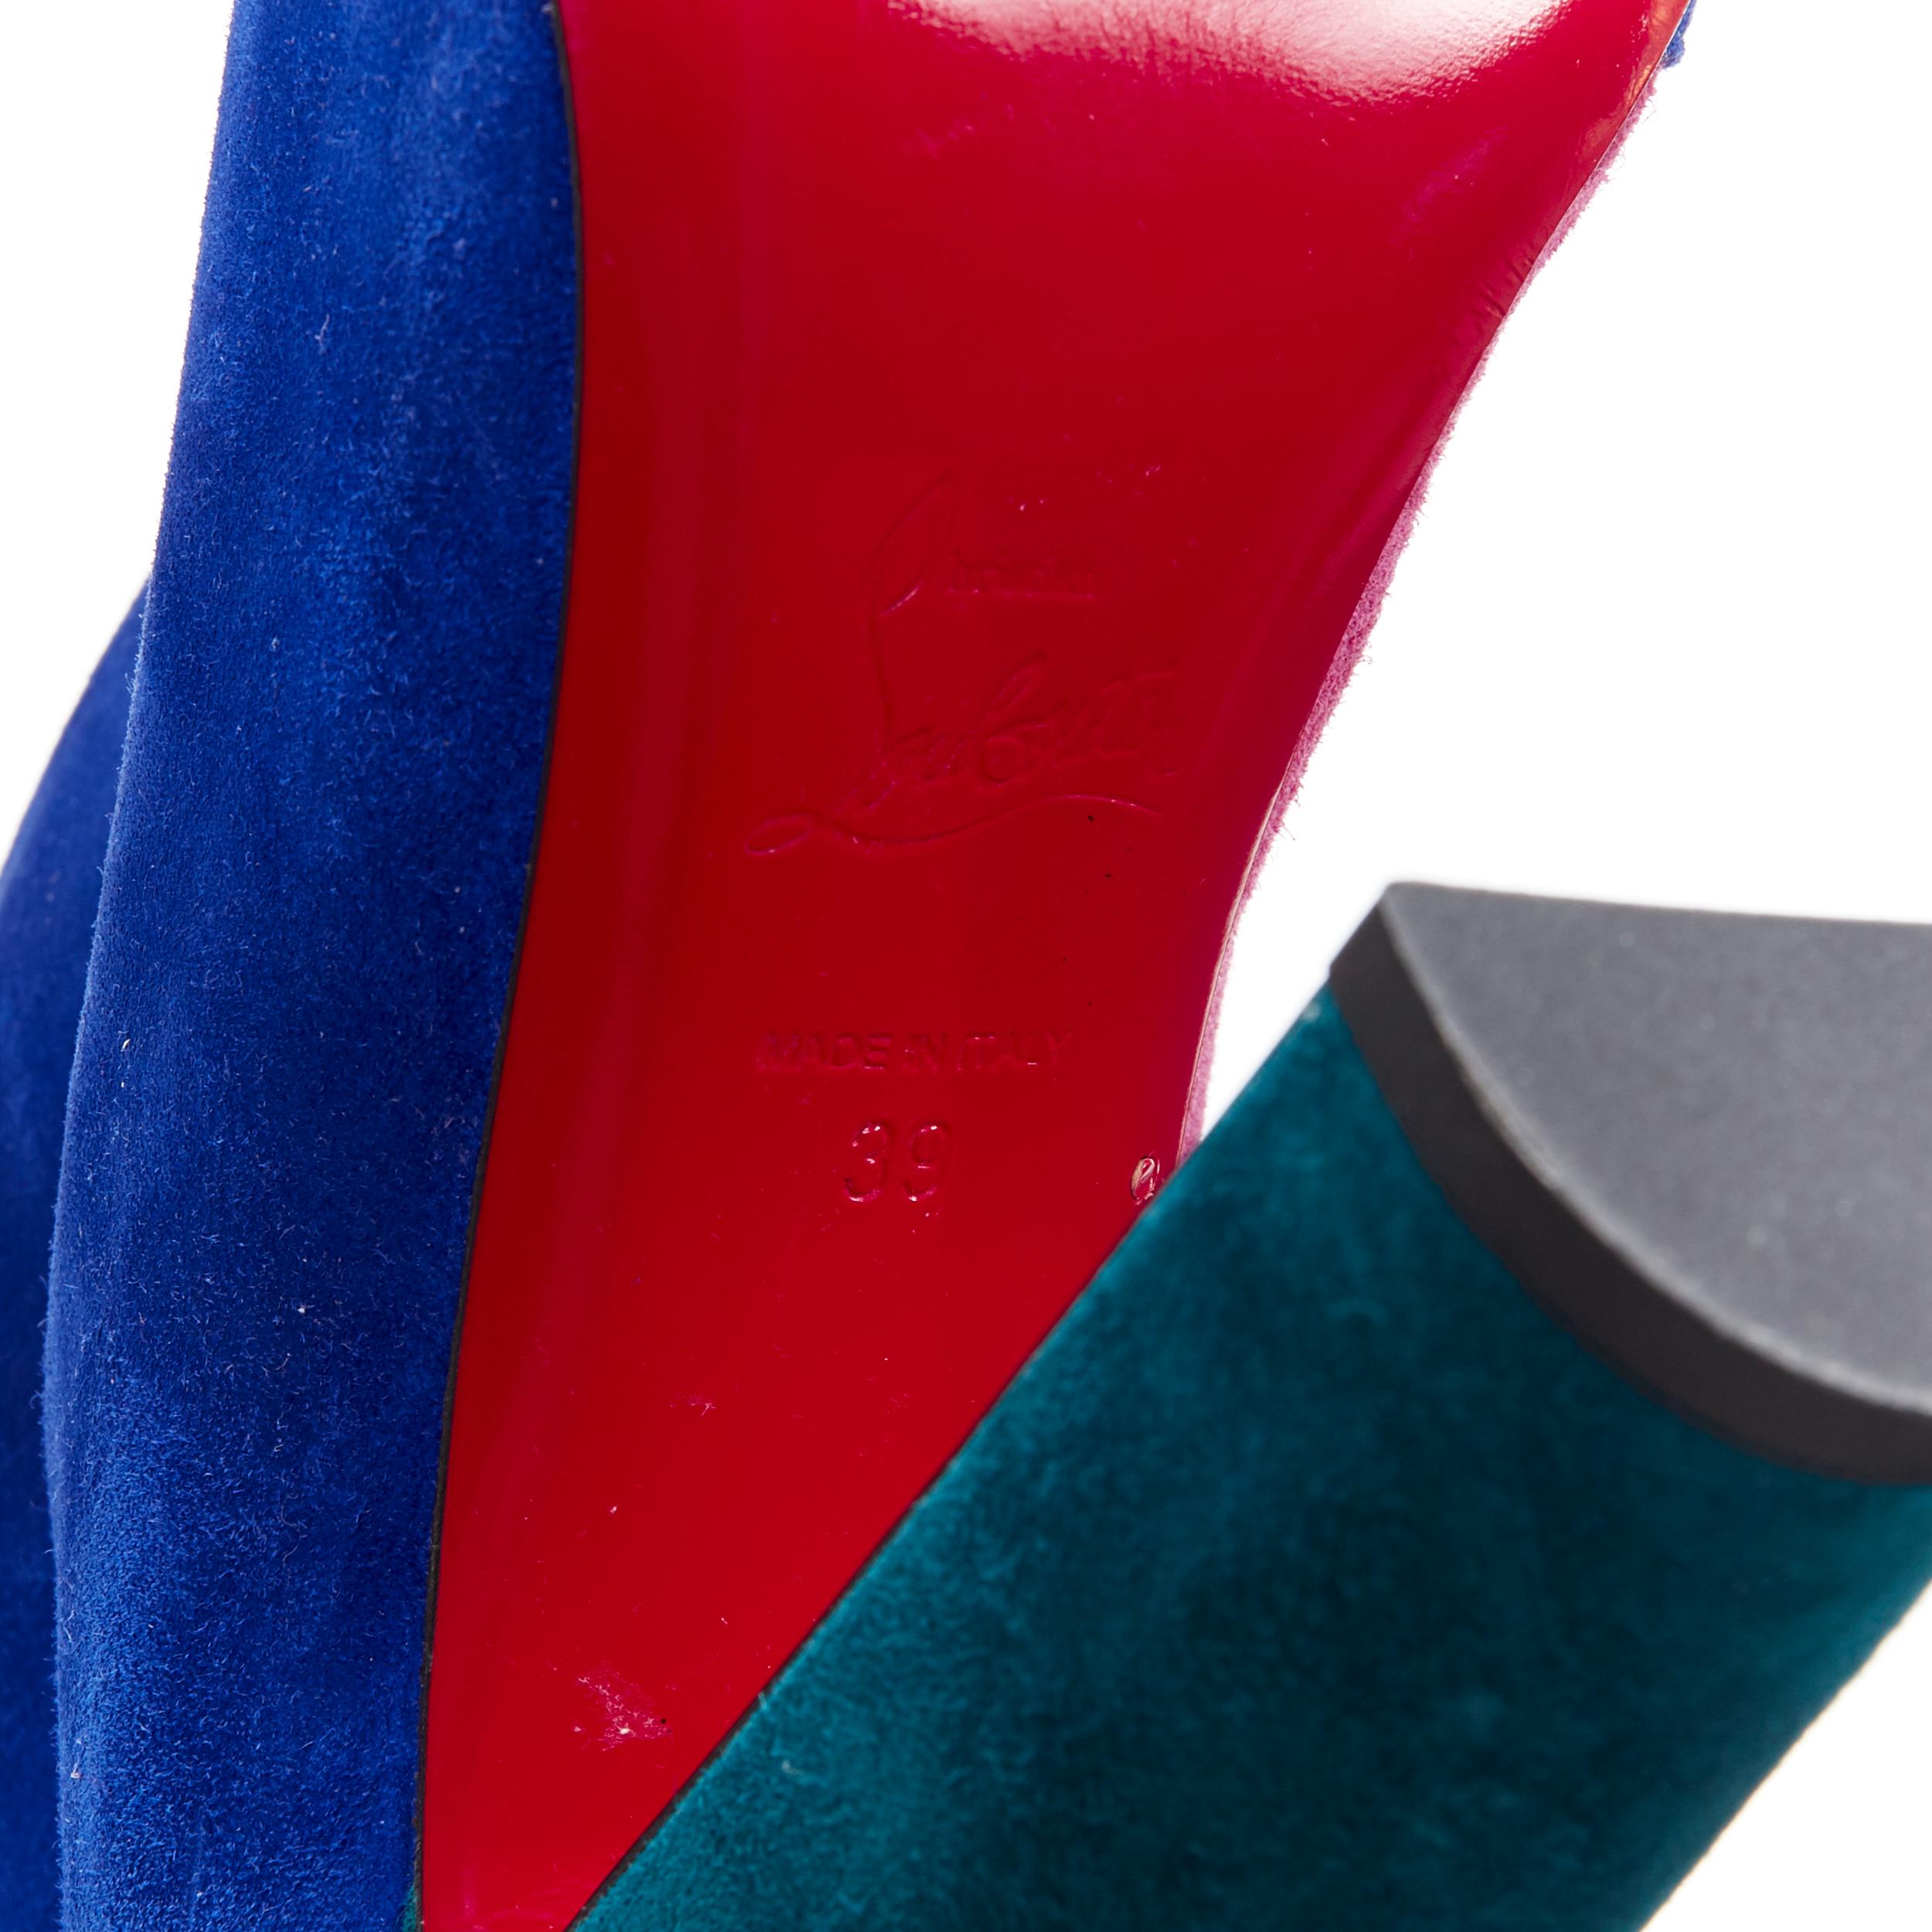 new CHRISTIAN LOUBOUTIN Botty Double 100 blue pink colorblocked suede booty EU39 3